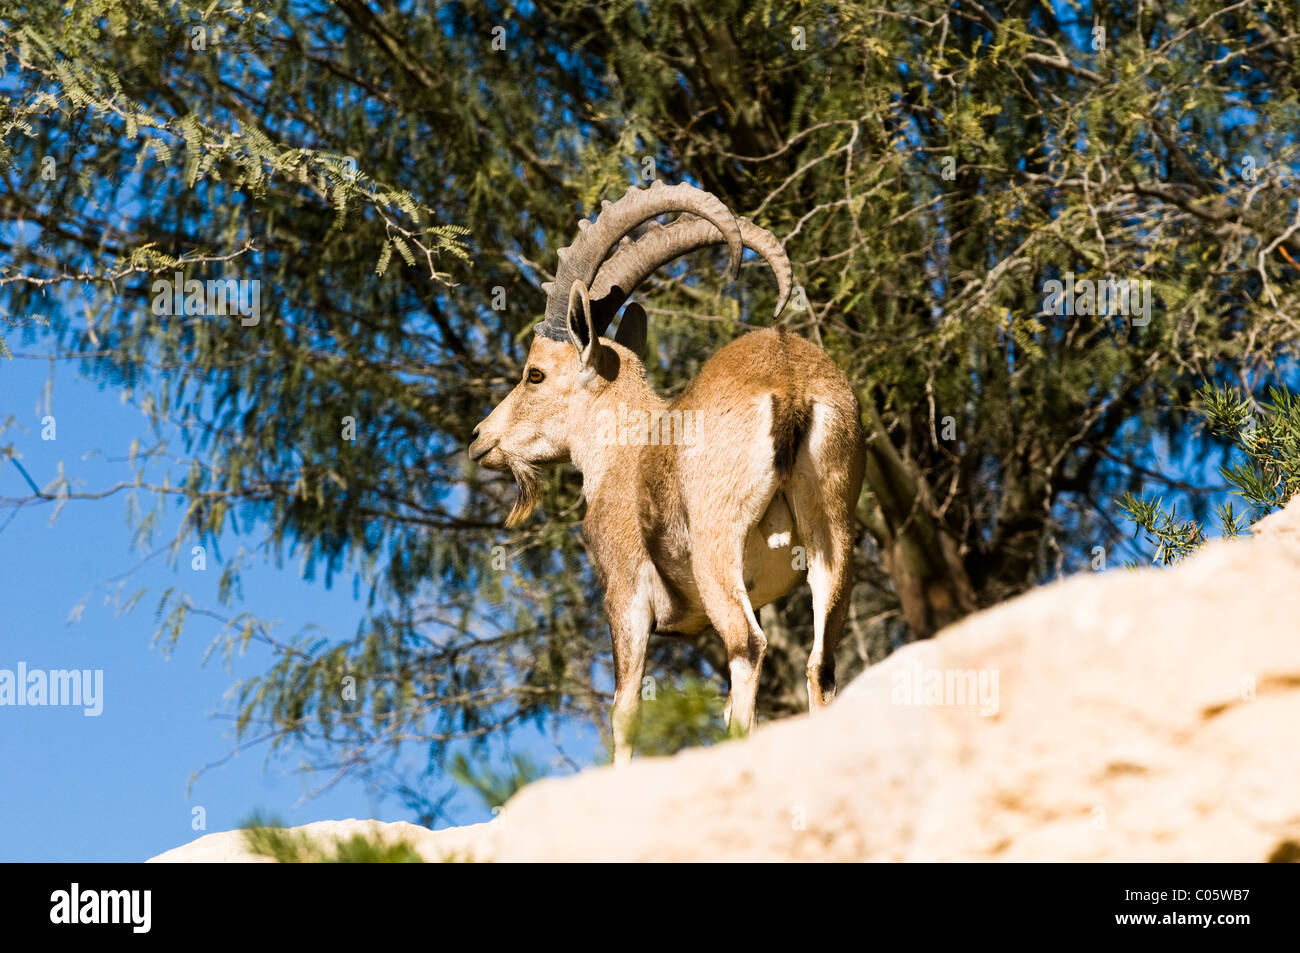 A beautiful Ibex ( mountain goat ) in the Negev desert, Israel. Stock Photo